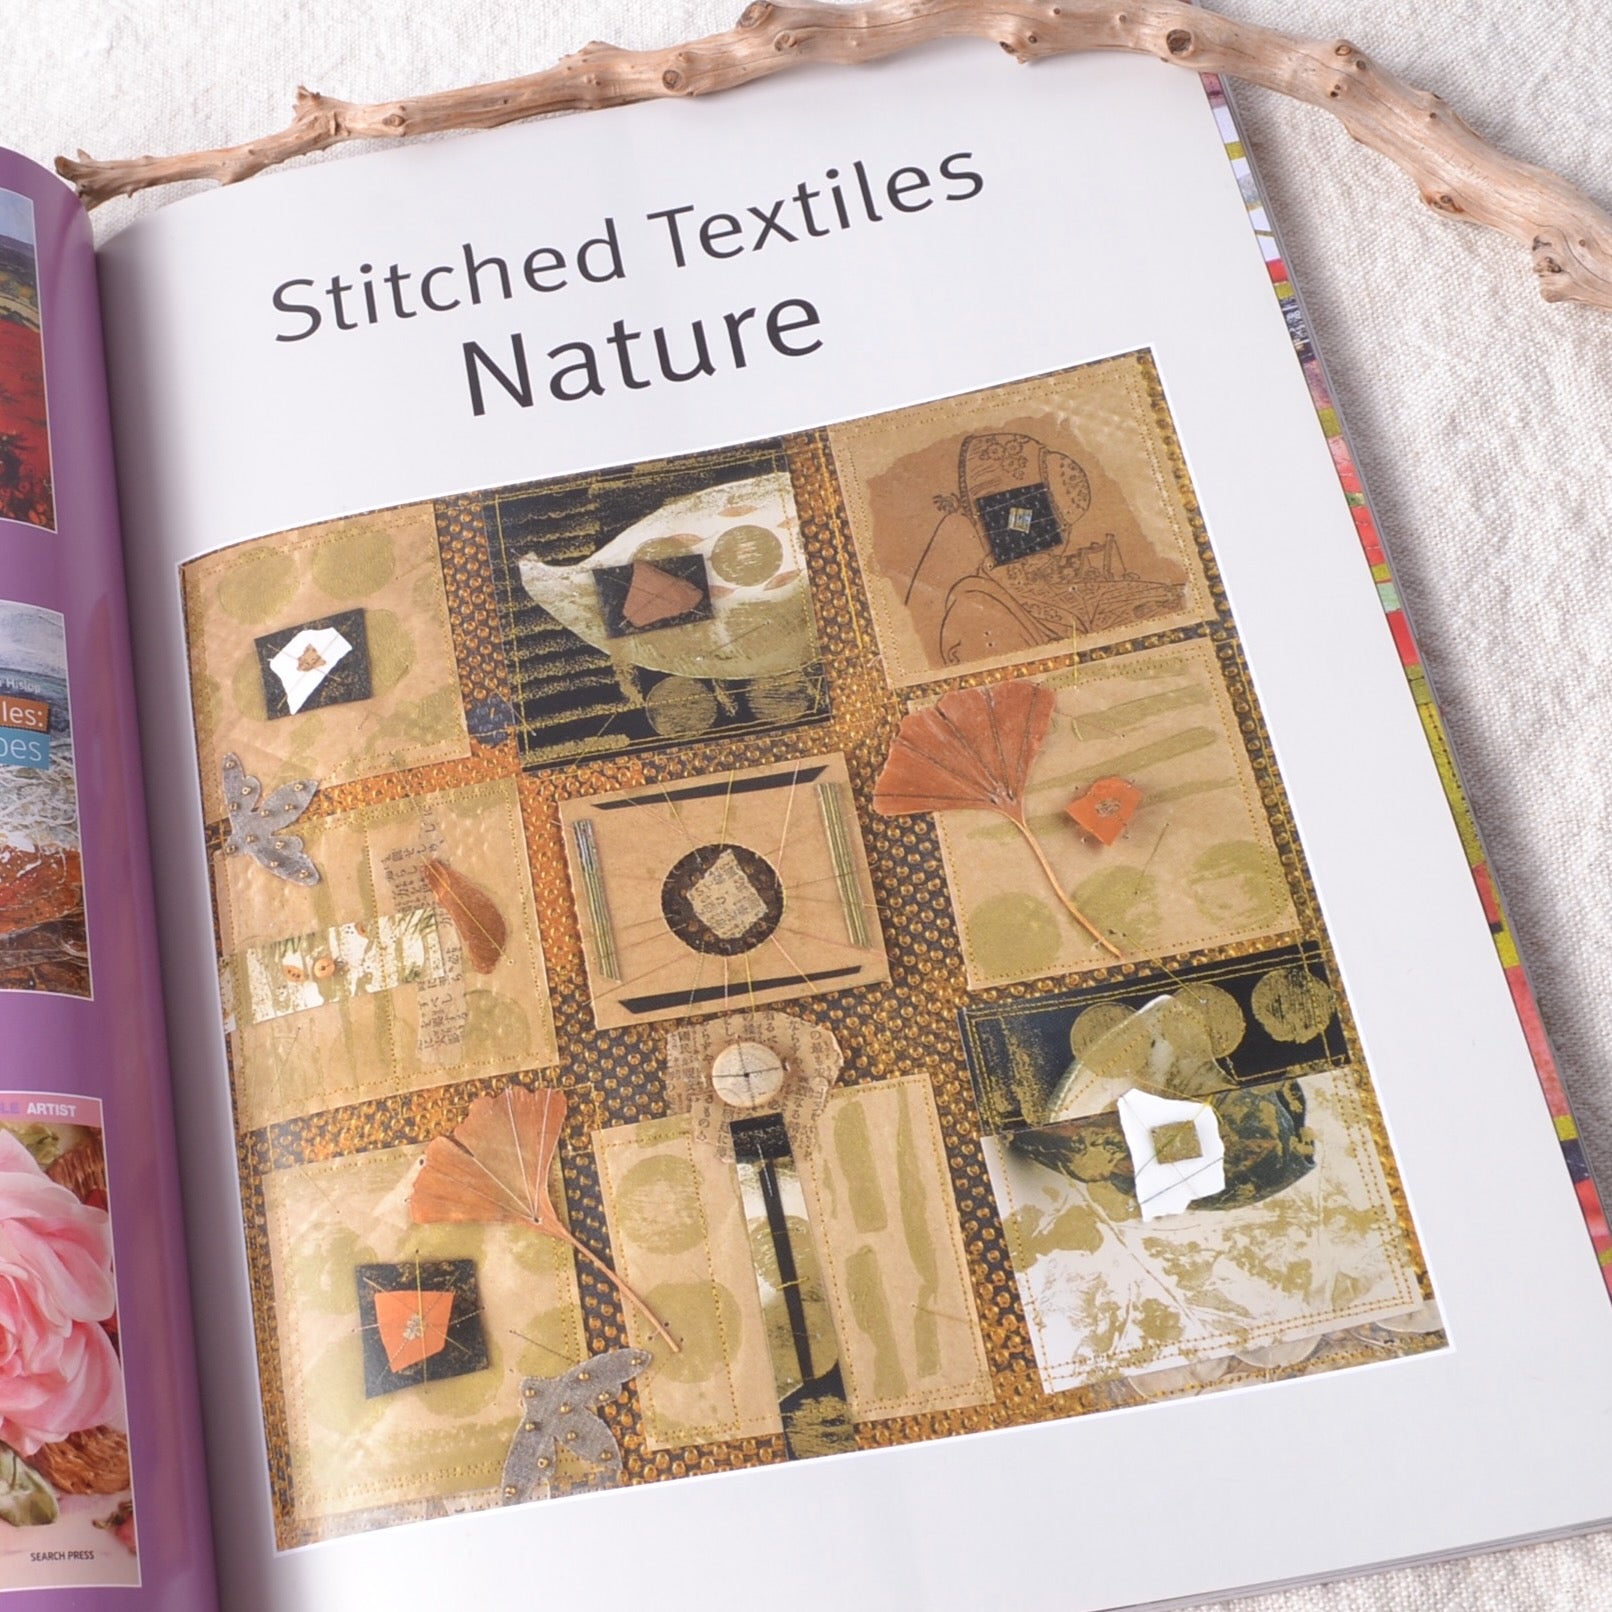 Stitches from the Garden by Kathy Schimtz - A Threaded Needle